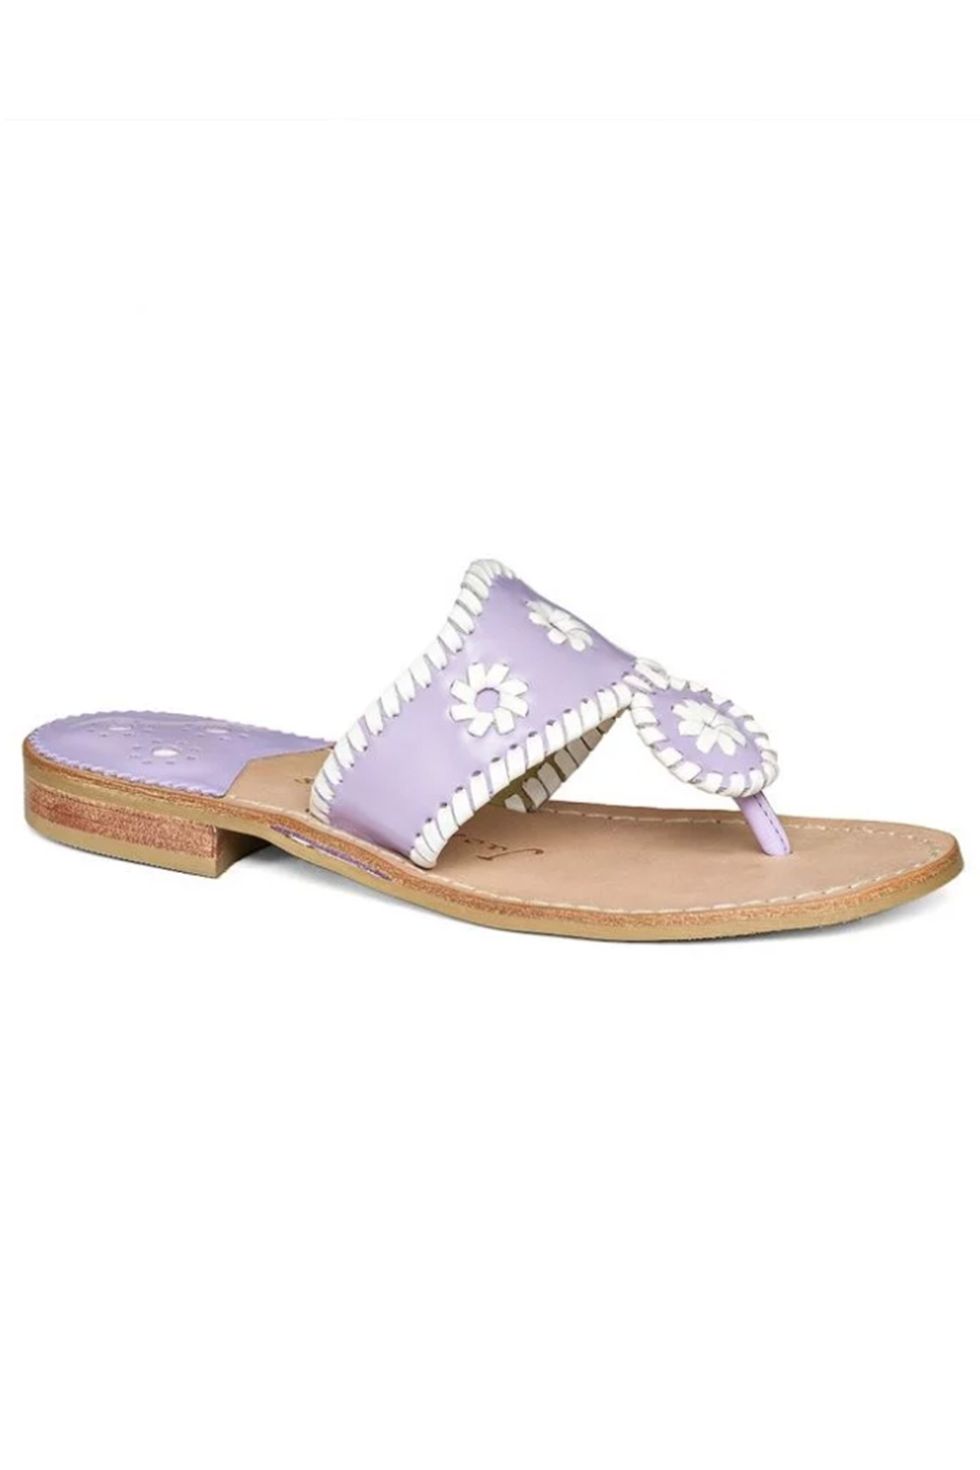 Jack Rogers Private Sale - Shop Jack Rogers Sandals During Private Sale